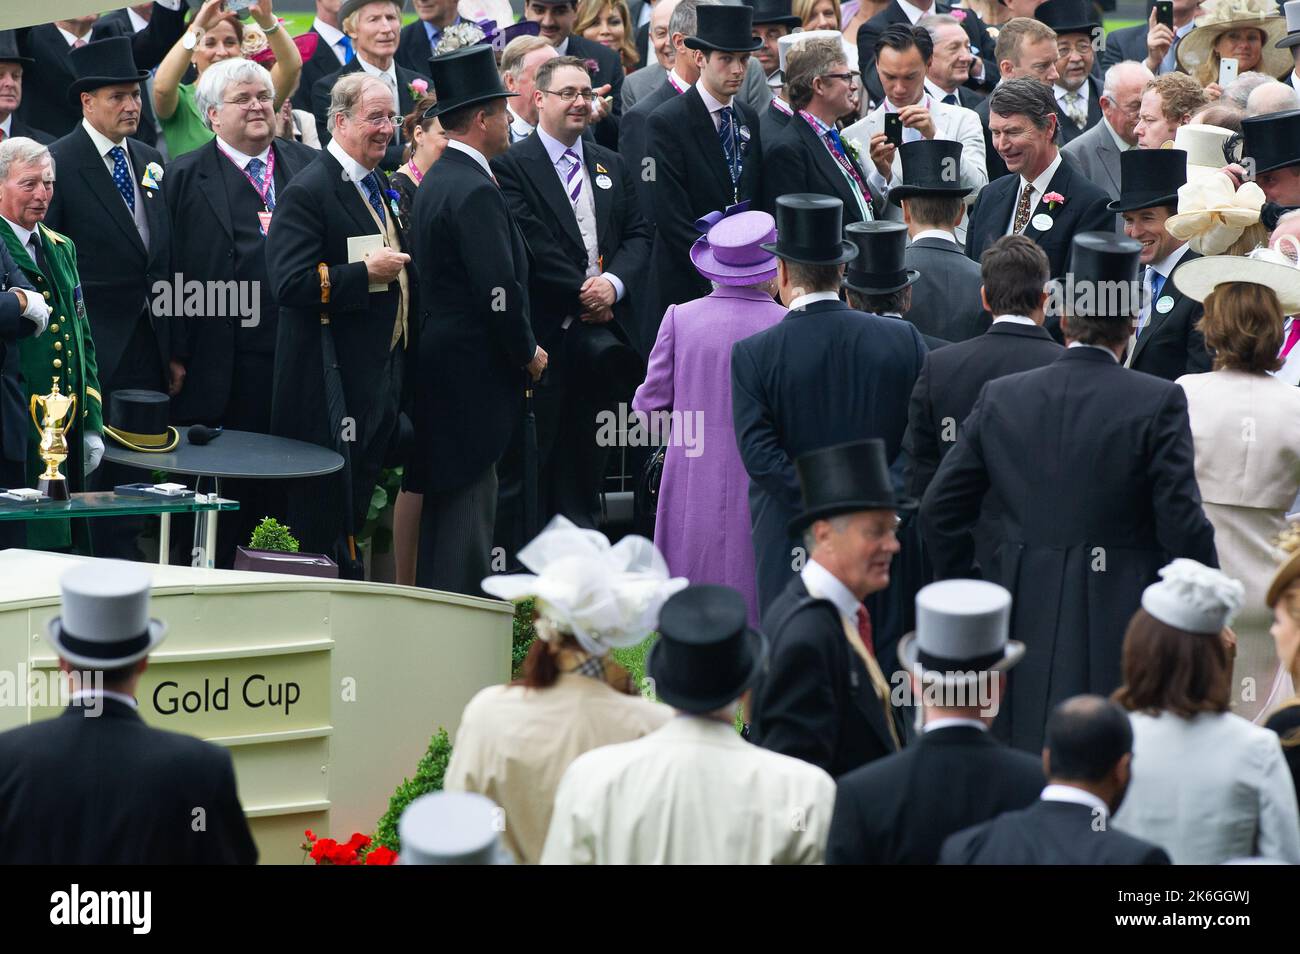 Ascot, Berkshire, UK. 20th June, 2013. Her Majesty the Queen was clearly delighted as her horse Estimate won the Ascot Gold Cup today on Ladies Day at Royal Ascot. This was an historic day as it was the first time a reigning monarch had won the Gold Cup. Estimate was ridden by jockey Ryan Moore. Queen Elizabeth II was due to the presentation for the Gold Cup but her son, the Duke of York did the presentation instead. Issue Date: 14th October 2022. Credit: Maureen McLean/Alamy Stock Photo